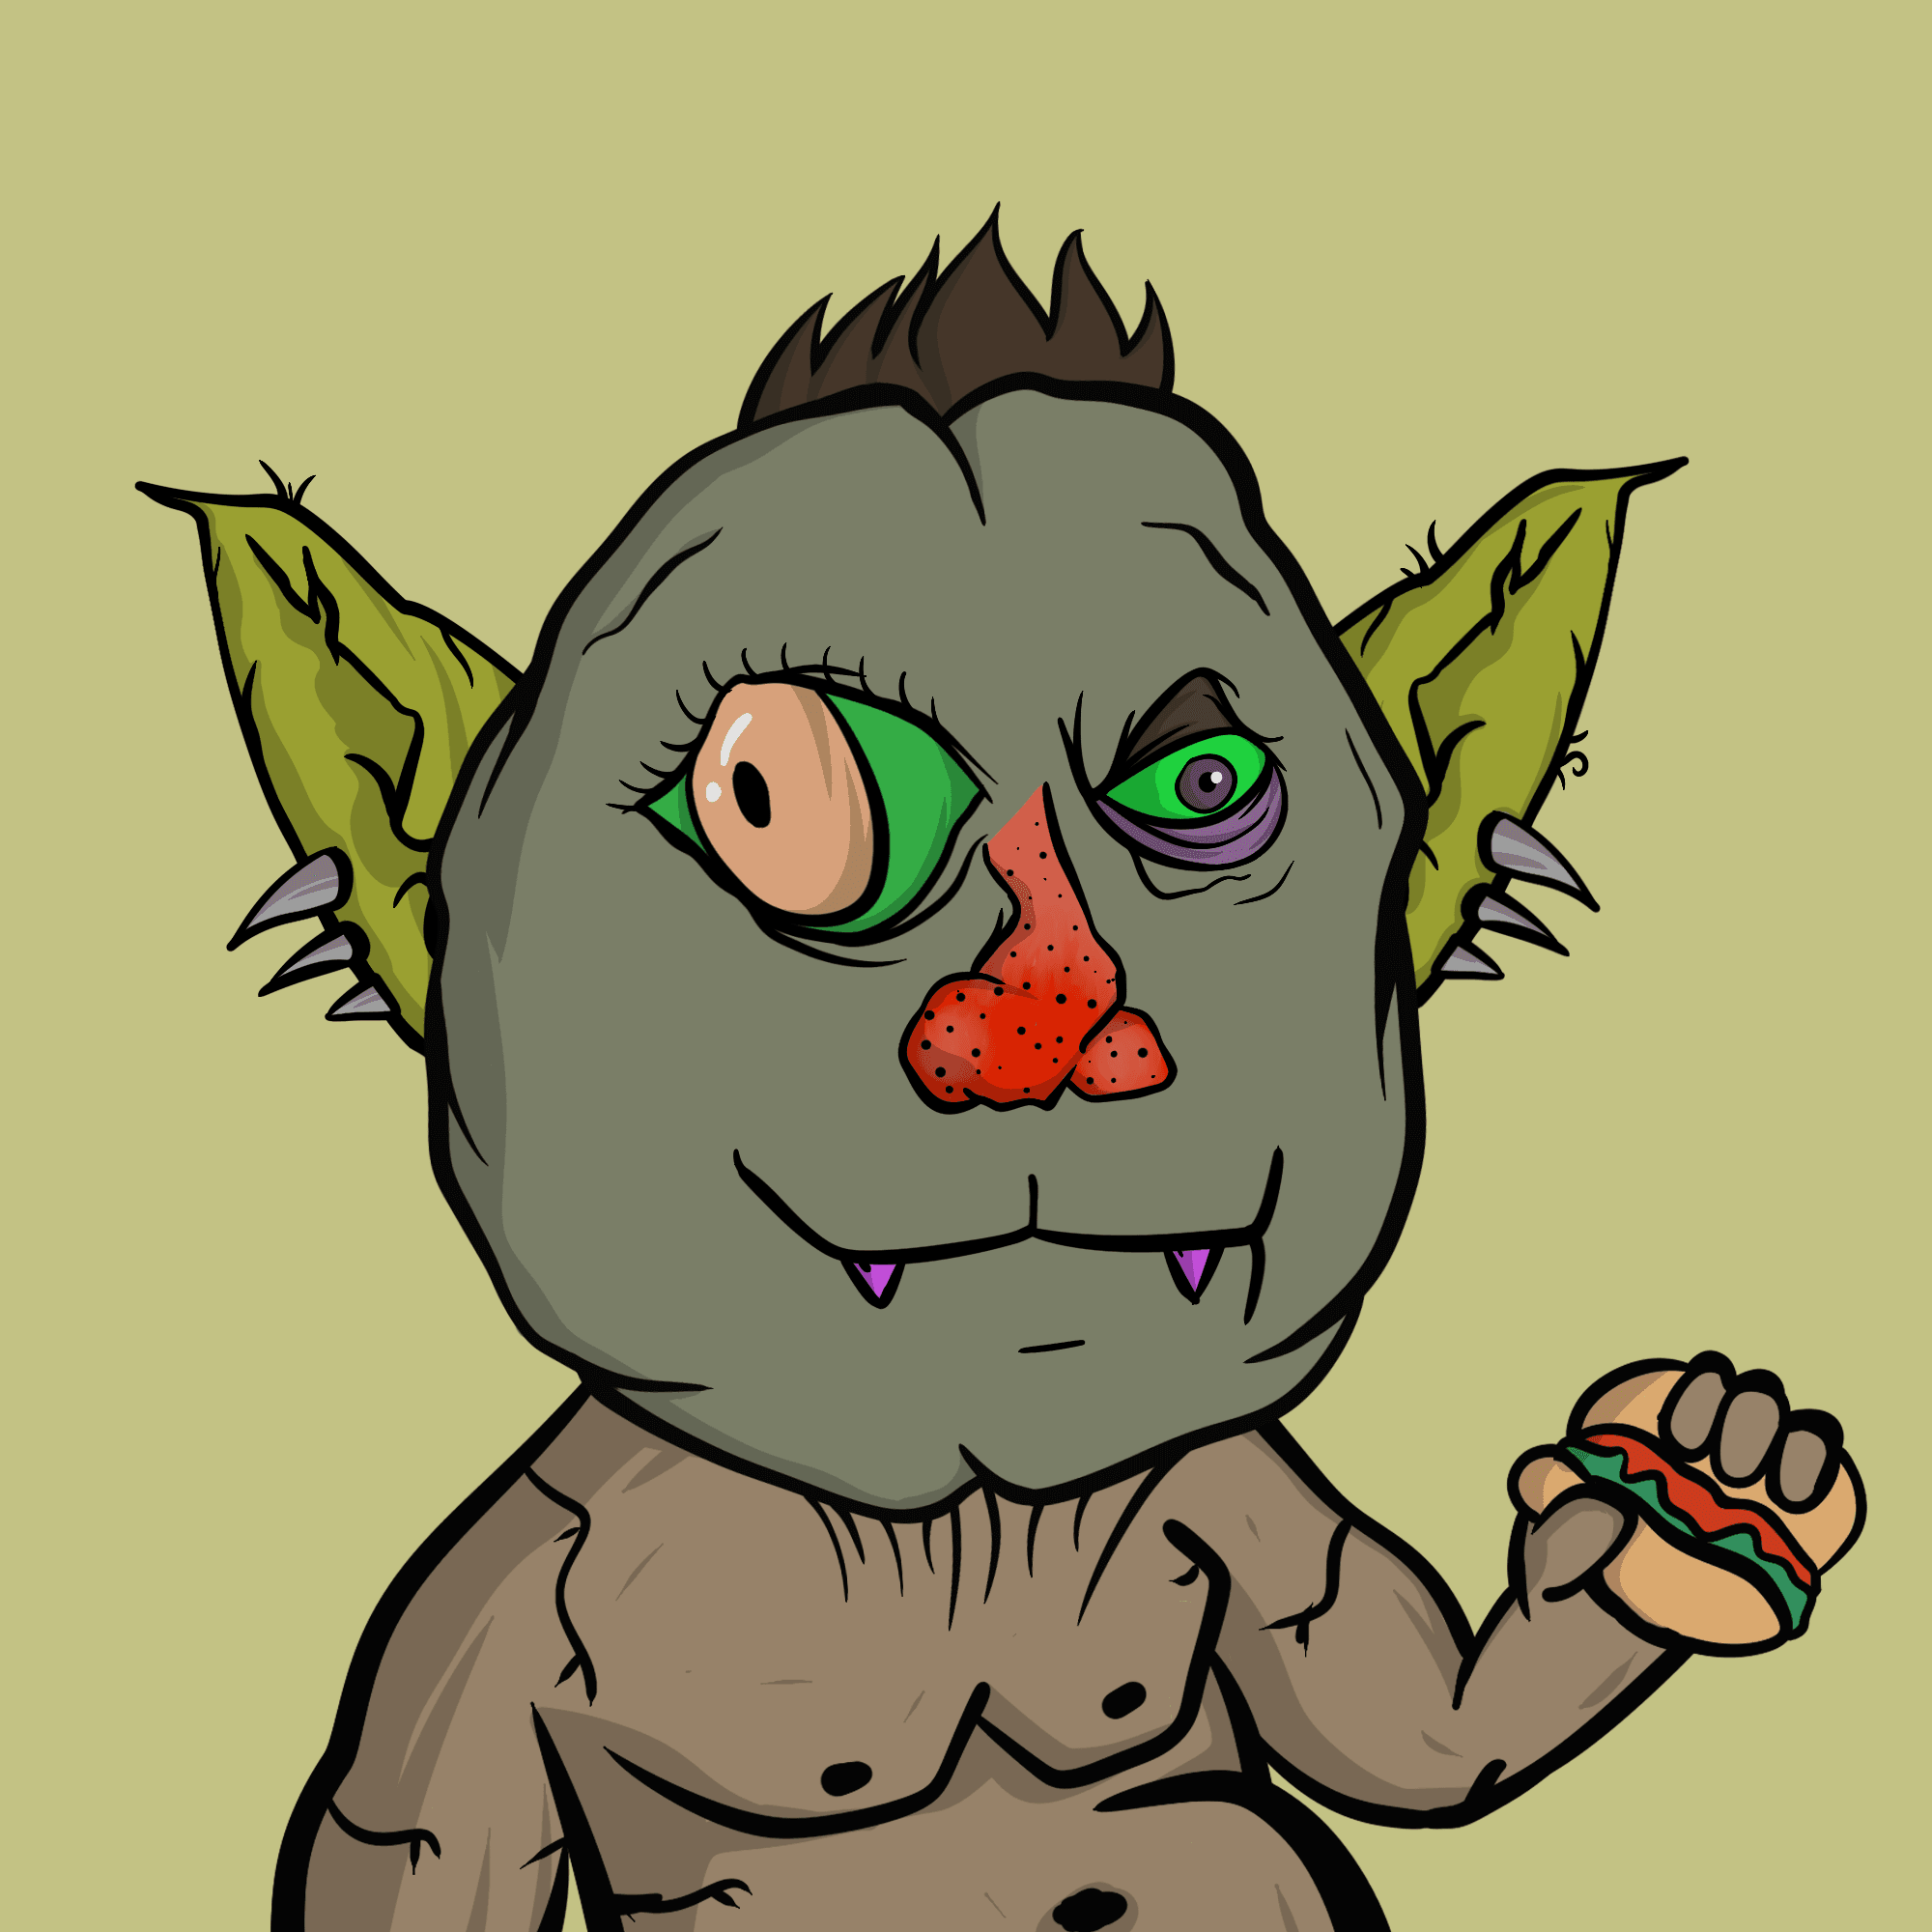 orcswtf #82